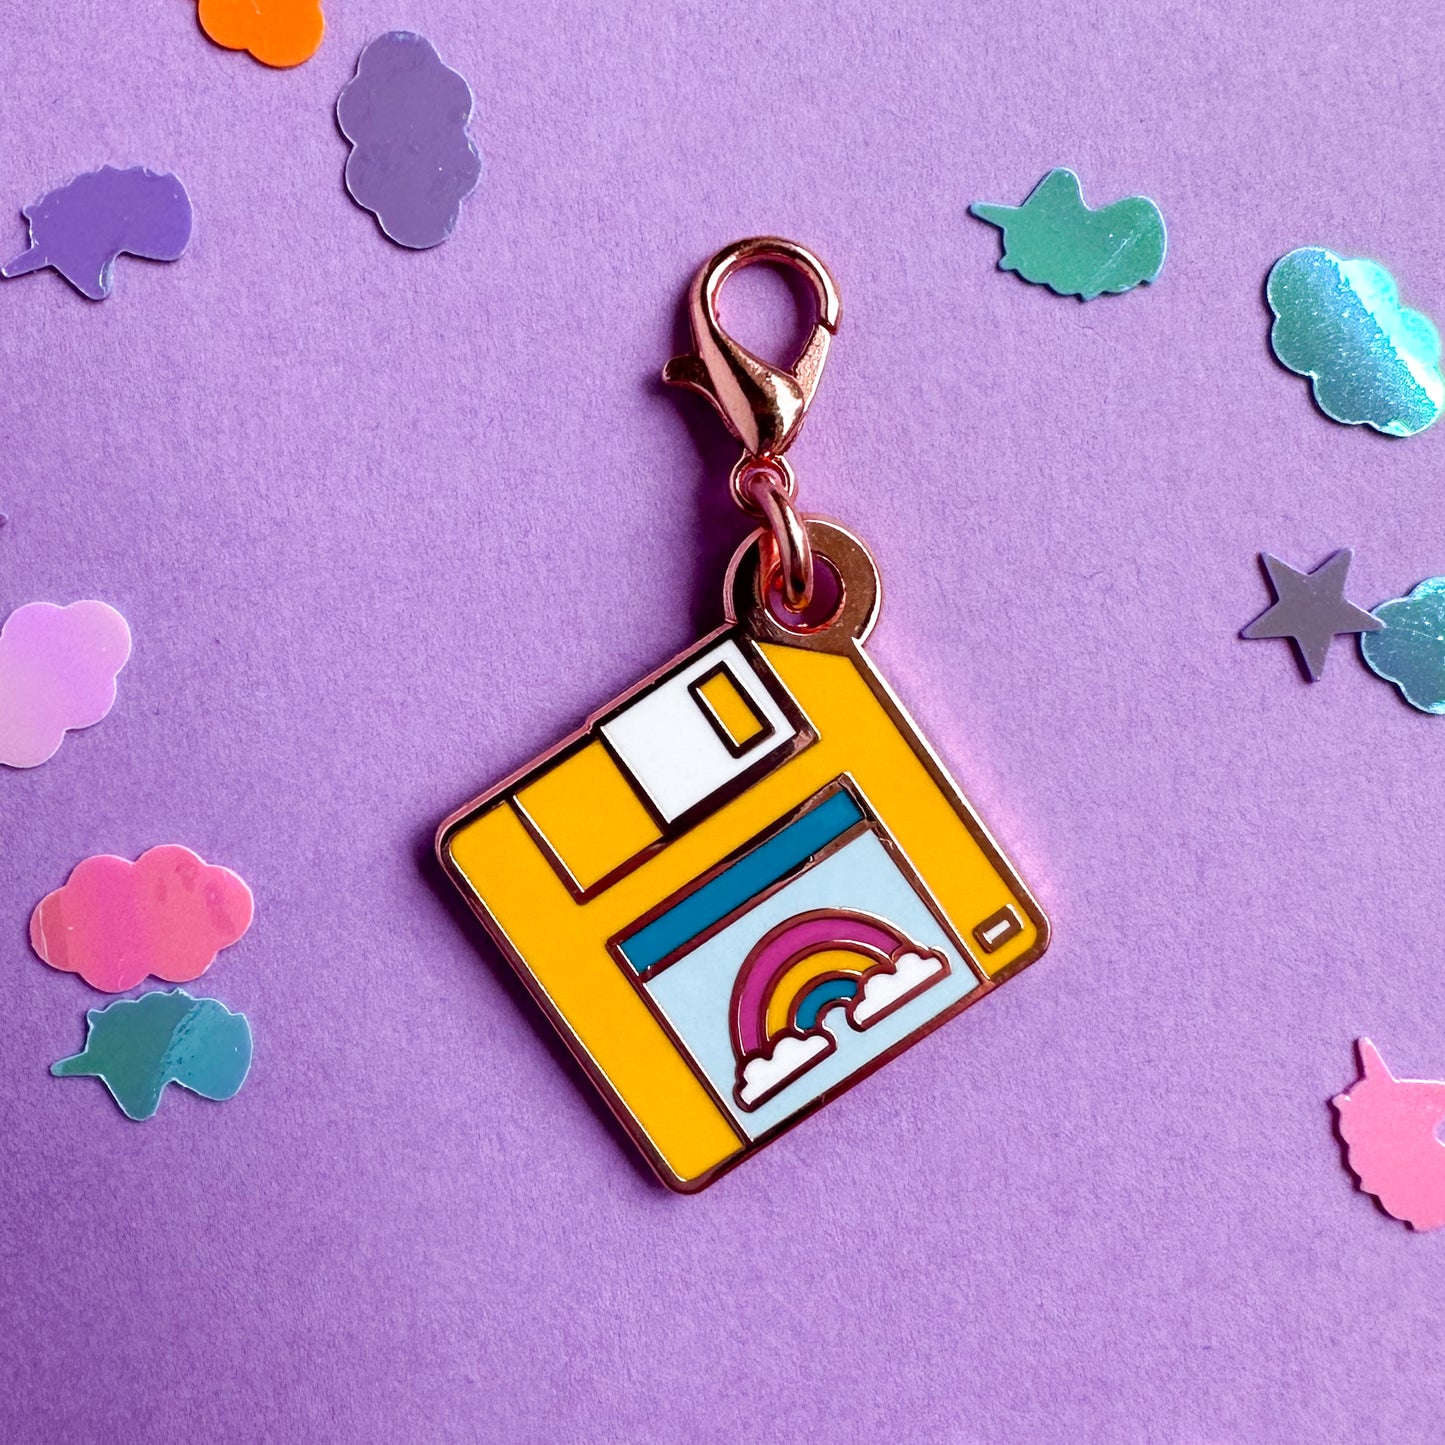 A lobster claw clasp charm shaped like a yellow floppy disk with a rainbow on the label. The charm is on a lavender confetti background.